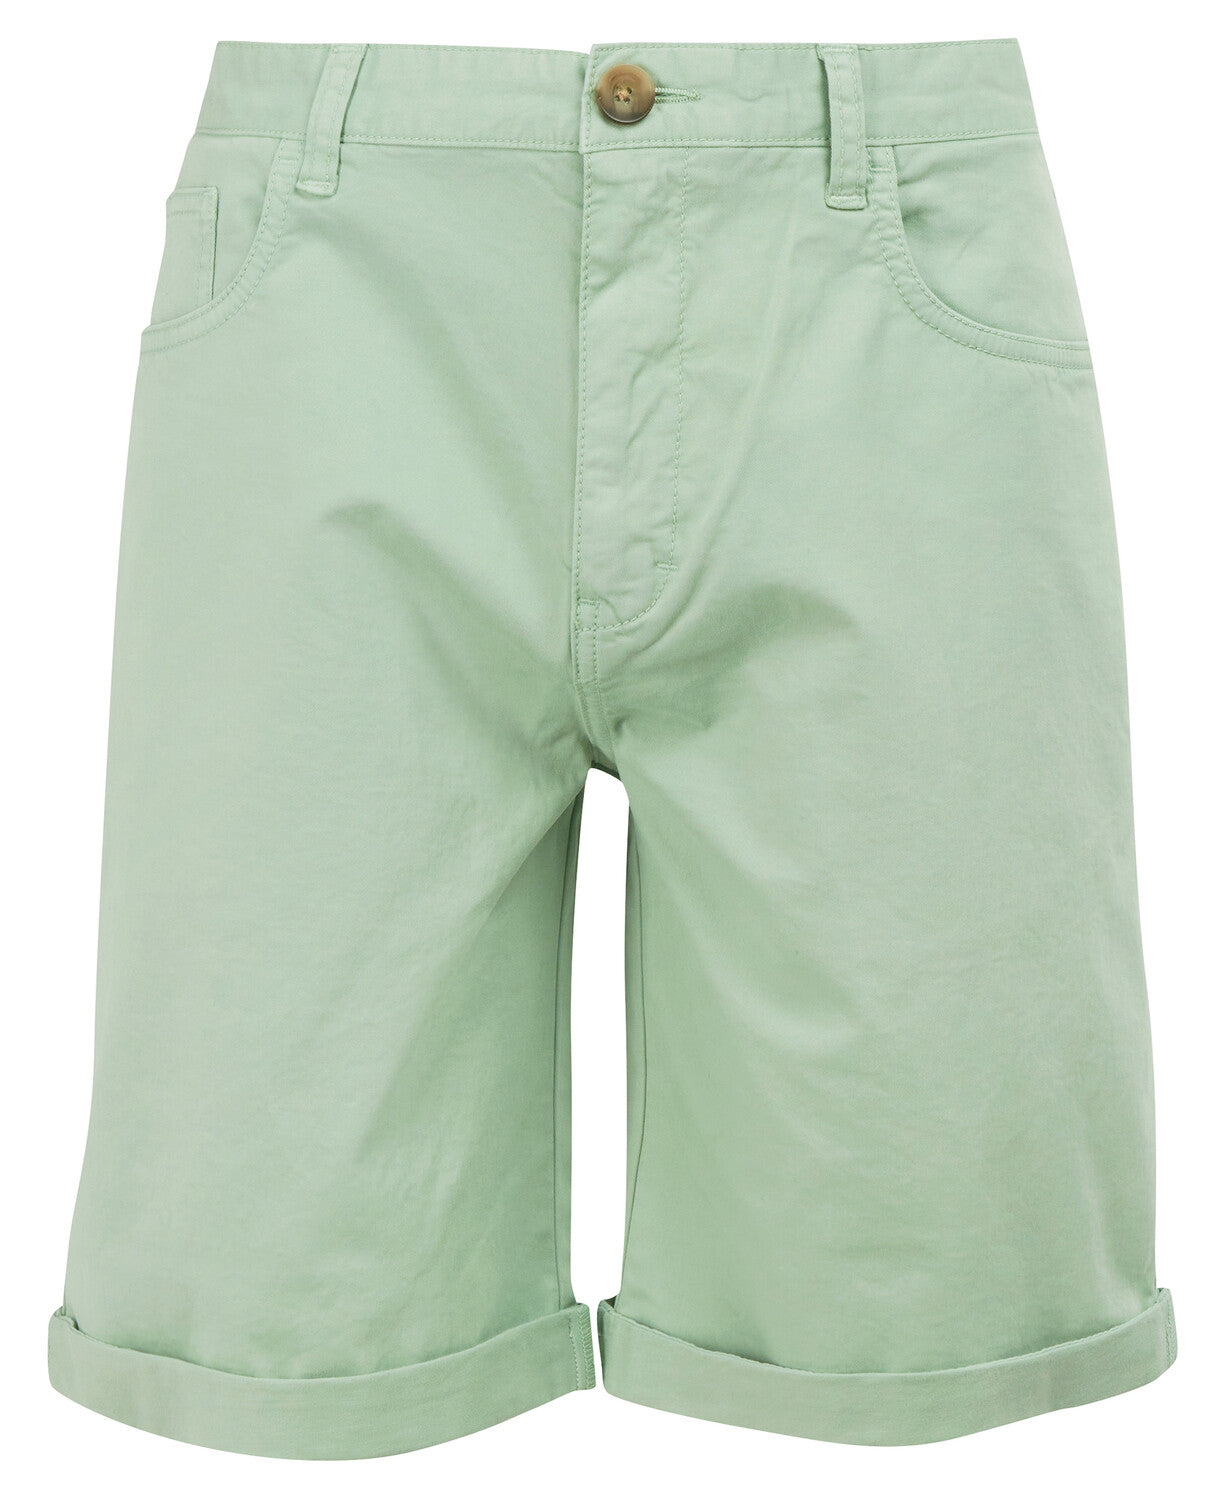 BARBOUR Twill Shorts MINT